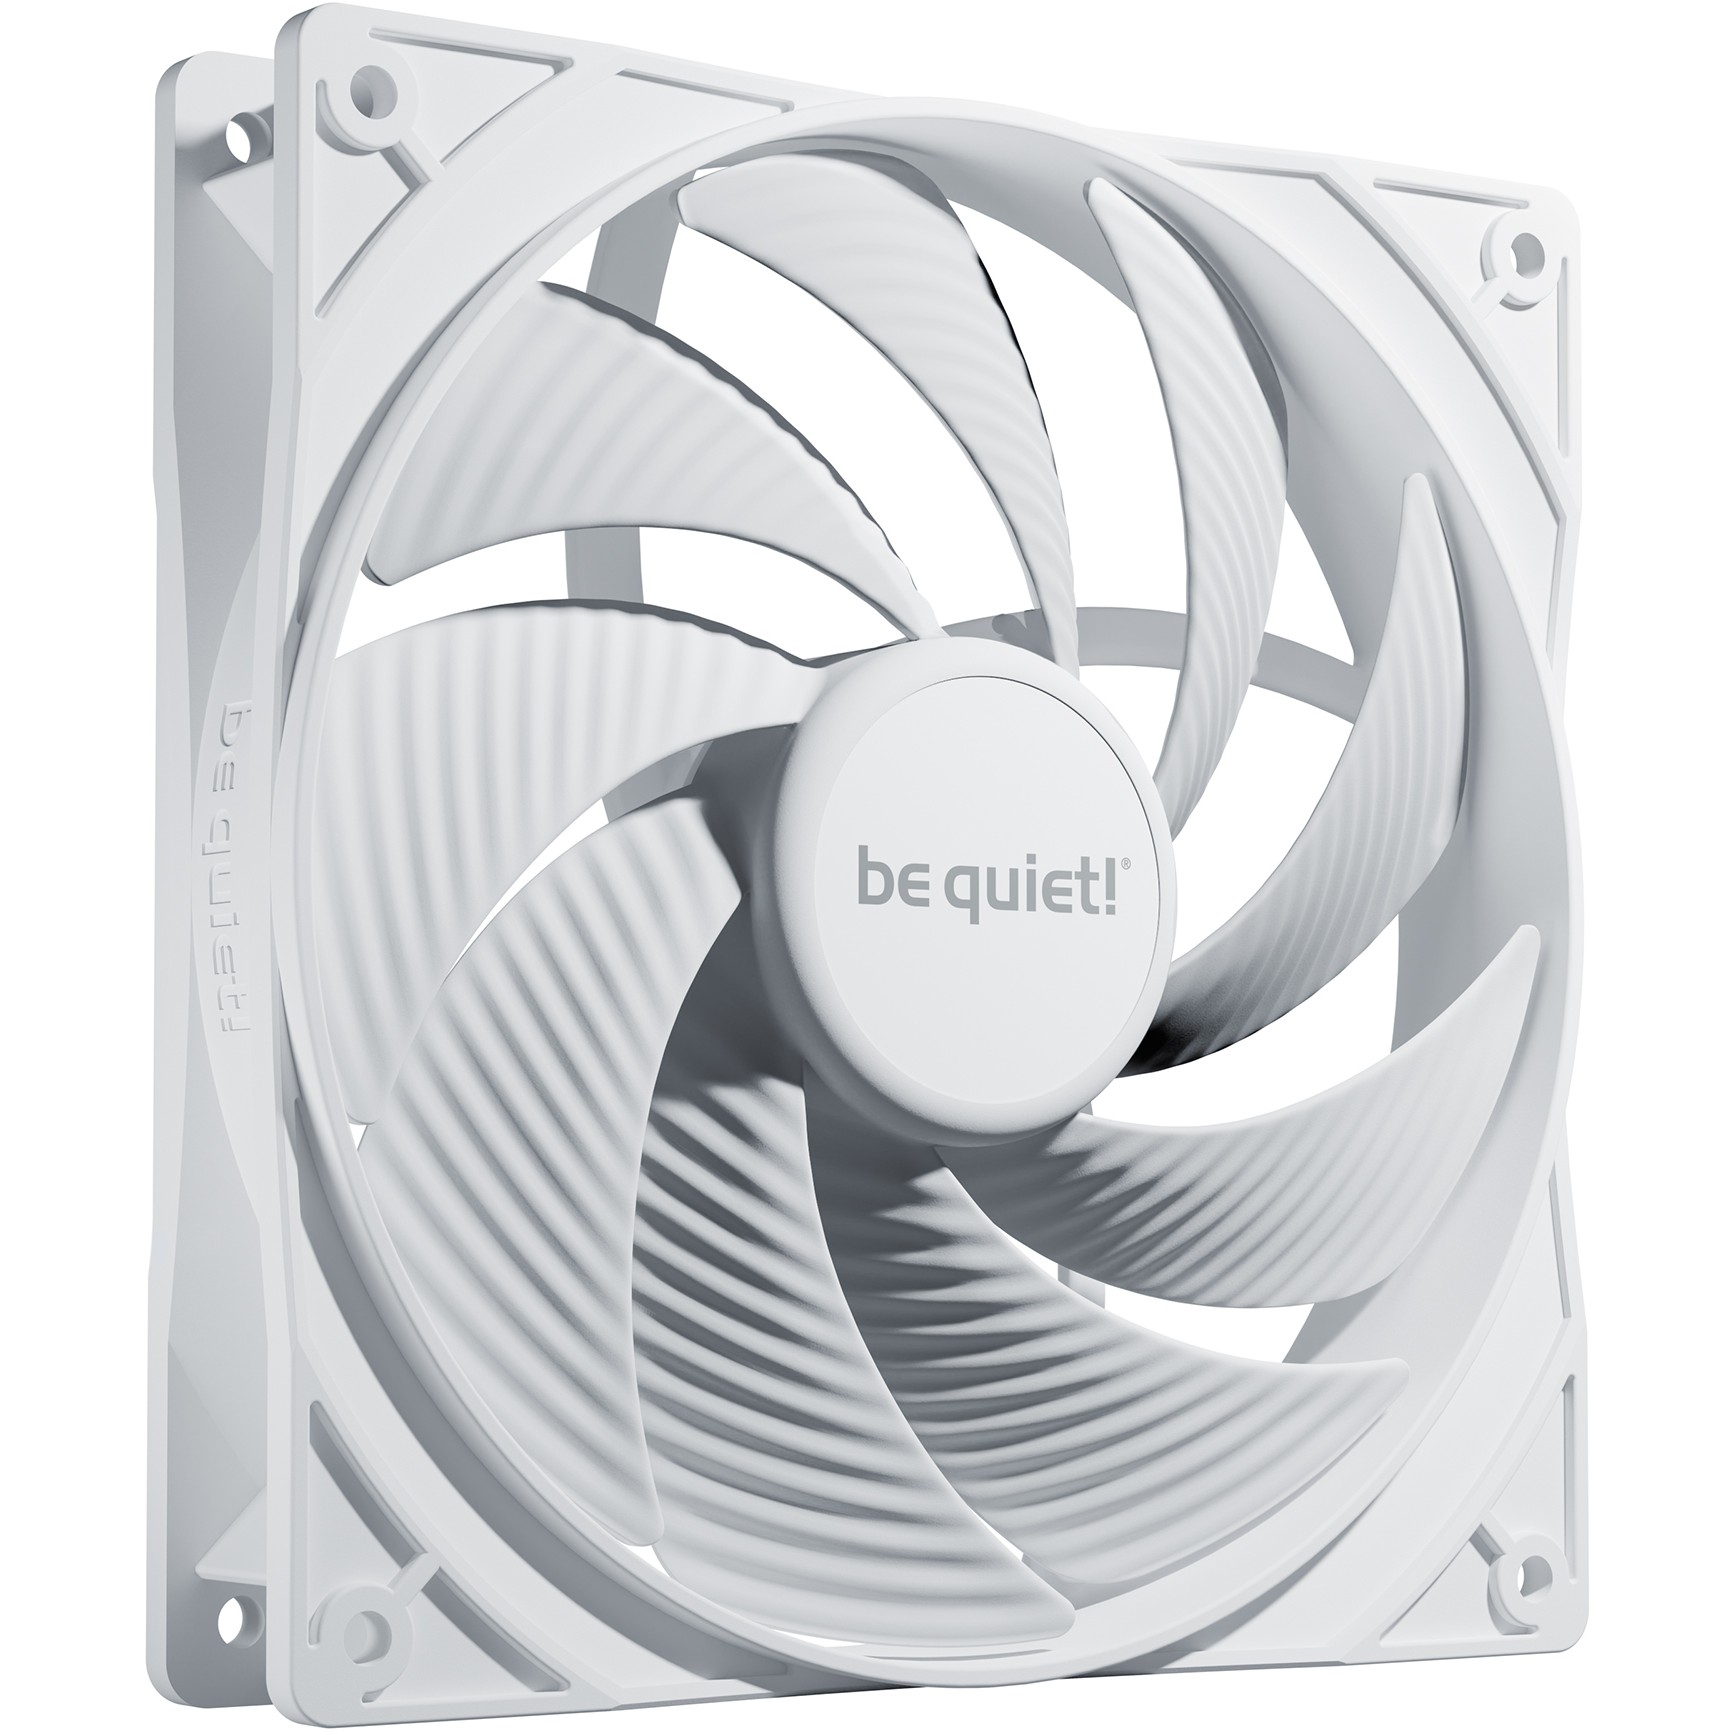 be quiet! Pure Wings 3 140mm PWM high-speed White